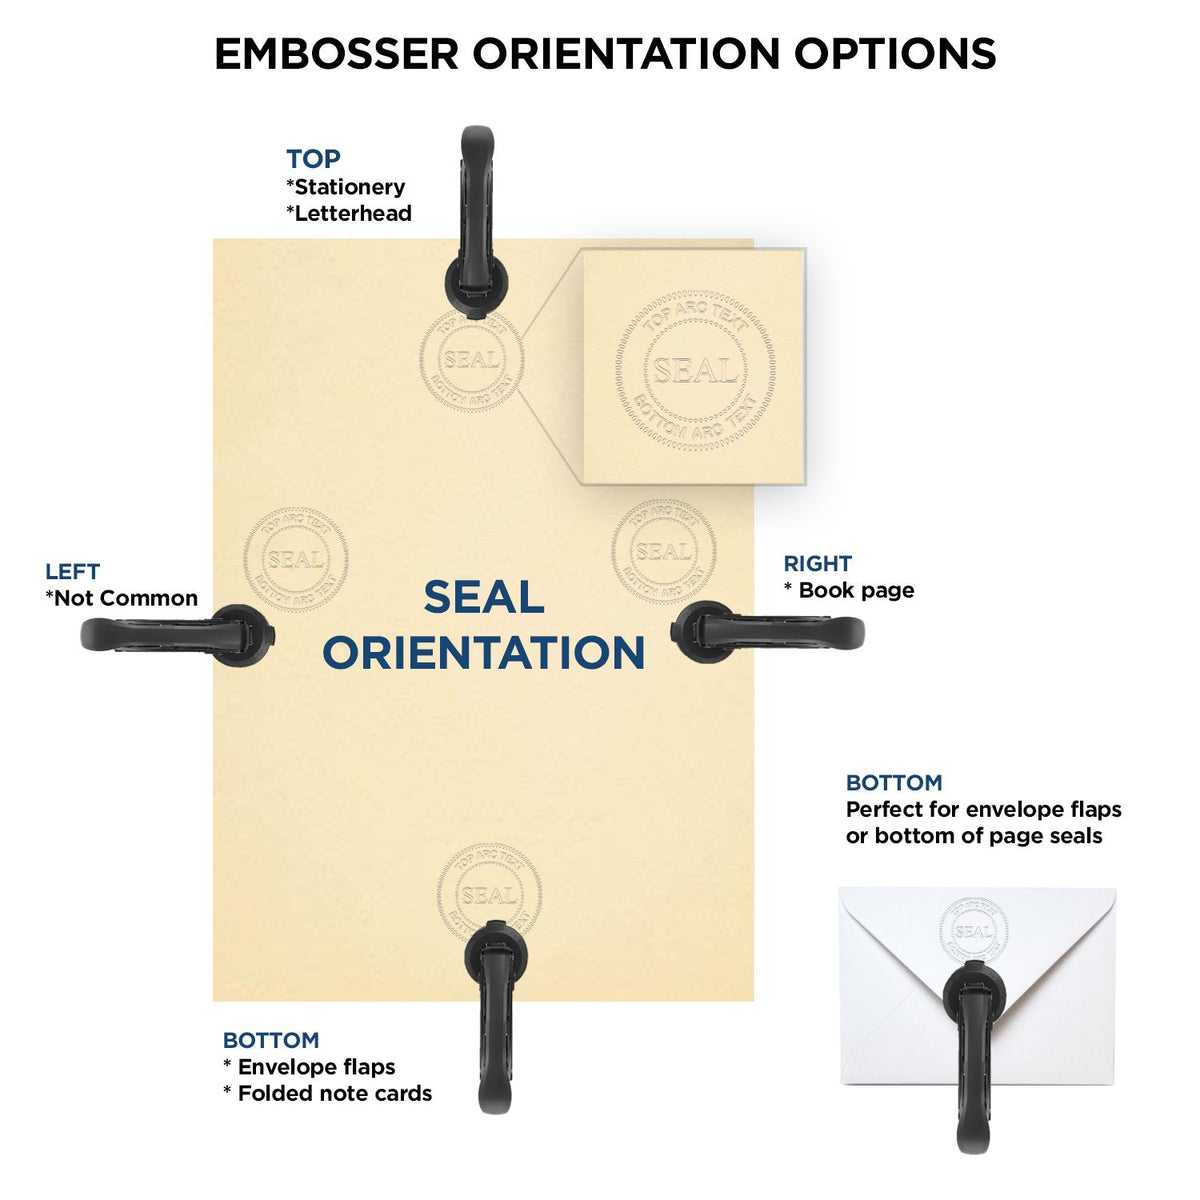 An infographic for the State of Kentucky Long Reach Architectural Embossing Seal showing embosser orientation, this is showing examples of a top, bottom, right and left insert.